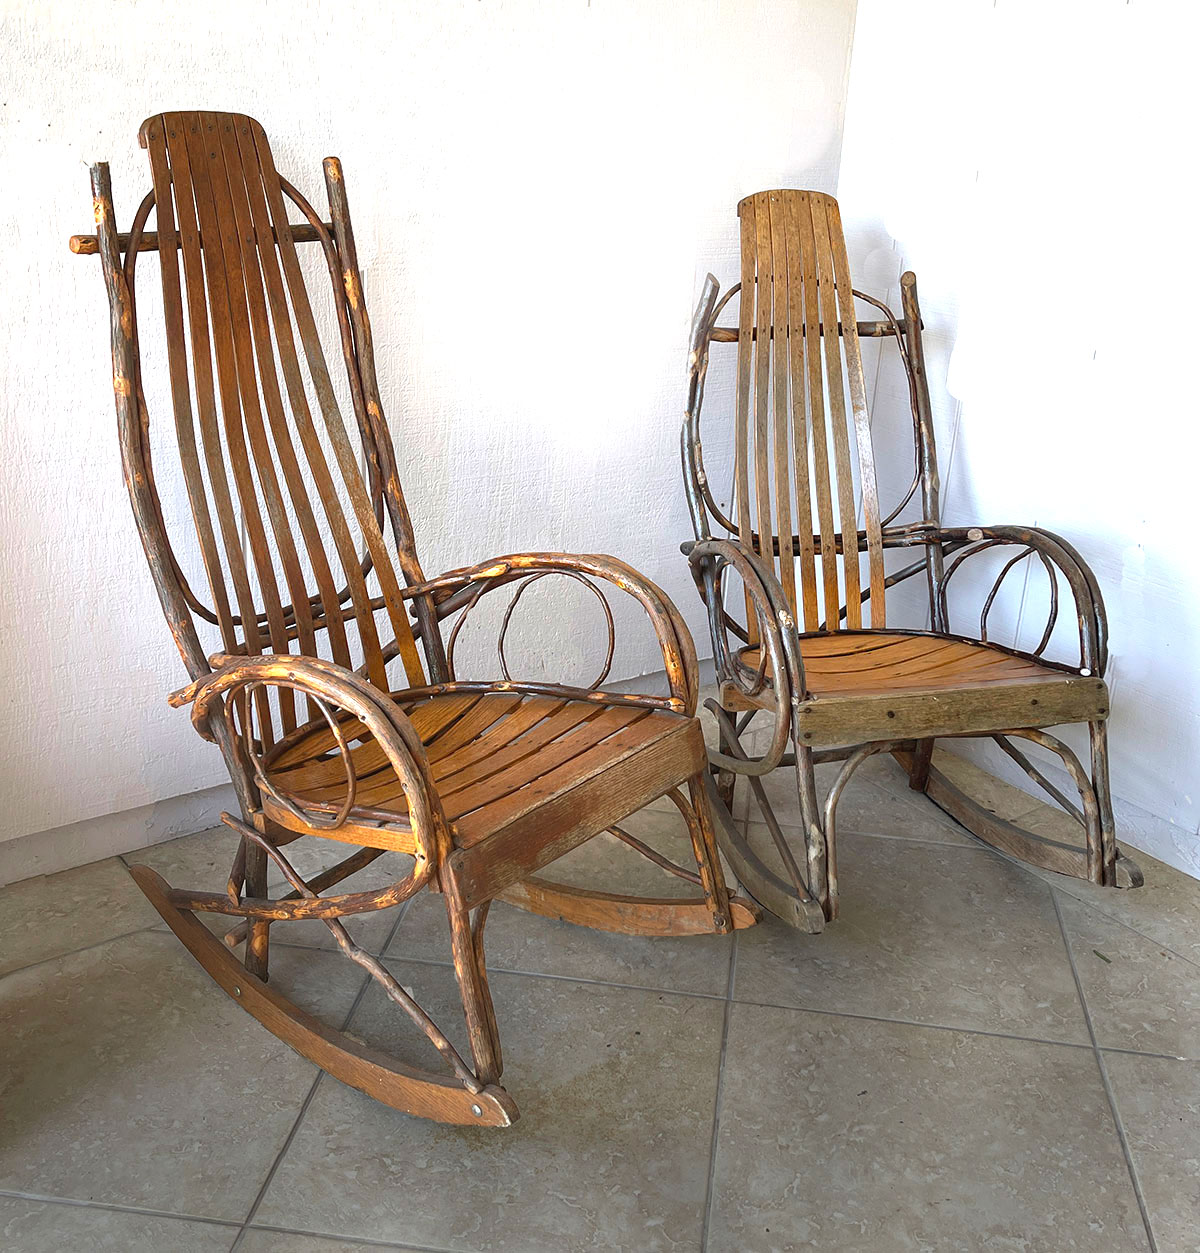 2 VINTAGE BENTWOOD ROCKING CHAIRS  274c9f